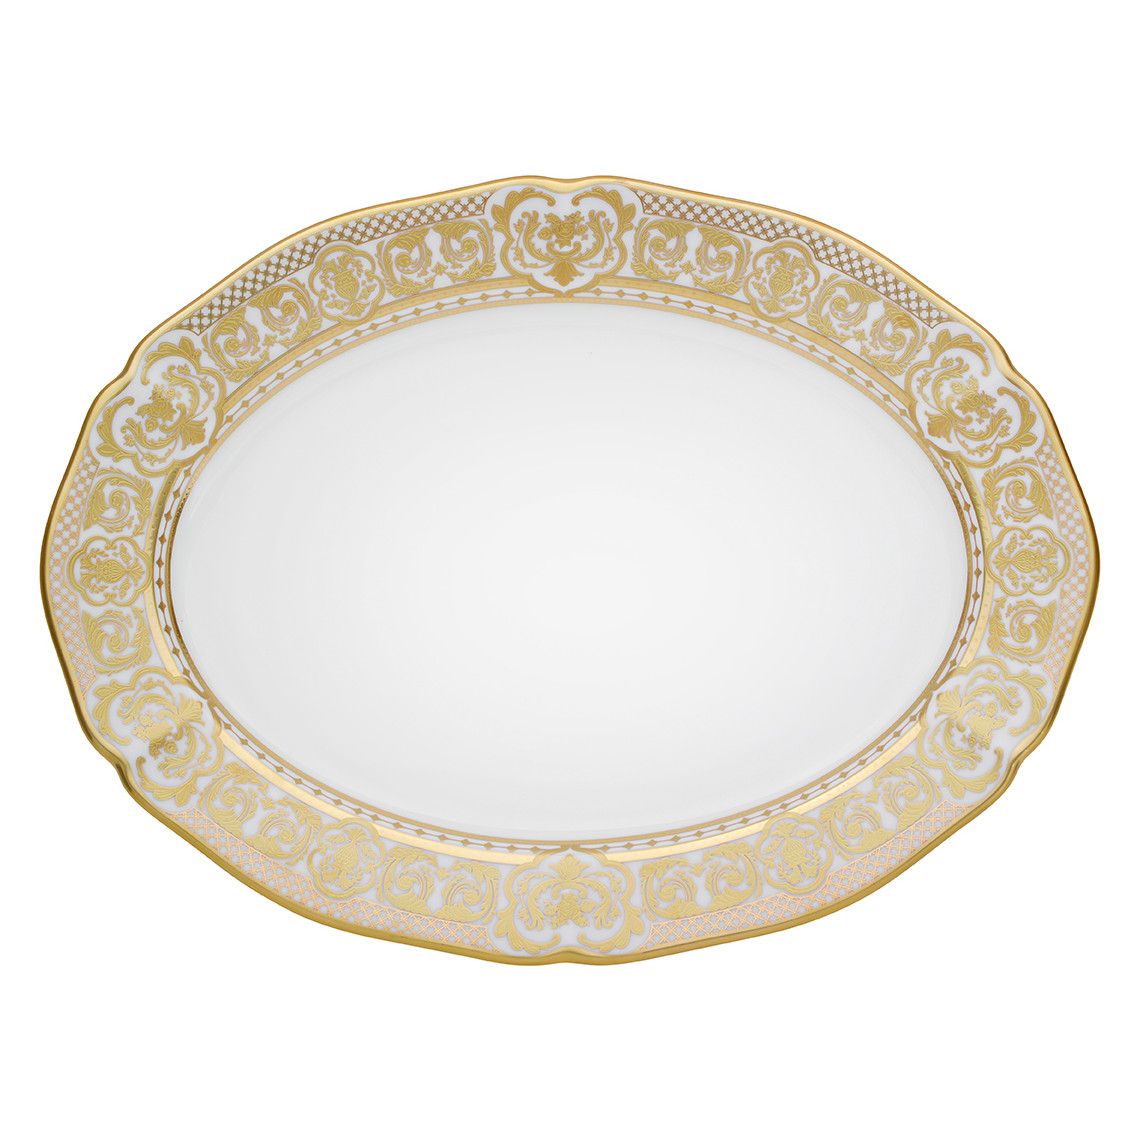 Prouna Carlsbad Queen White 14” Oval Platter White Background Photo